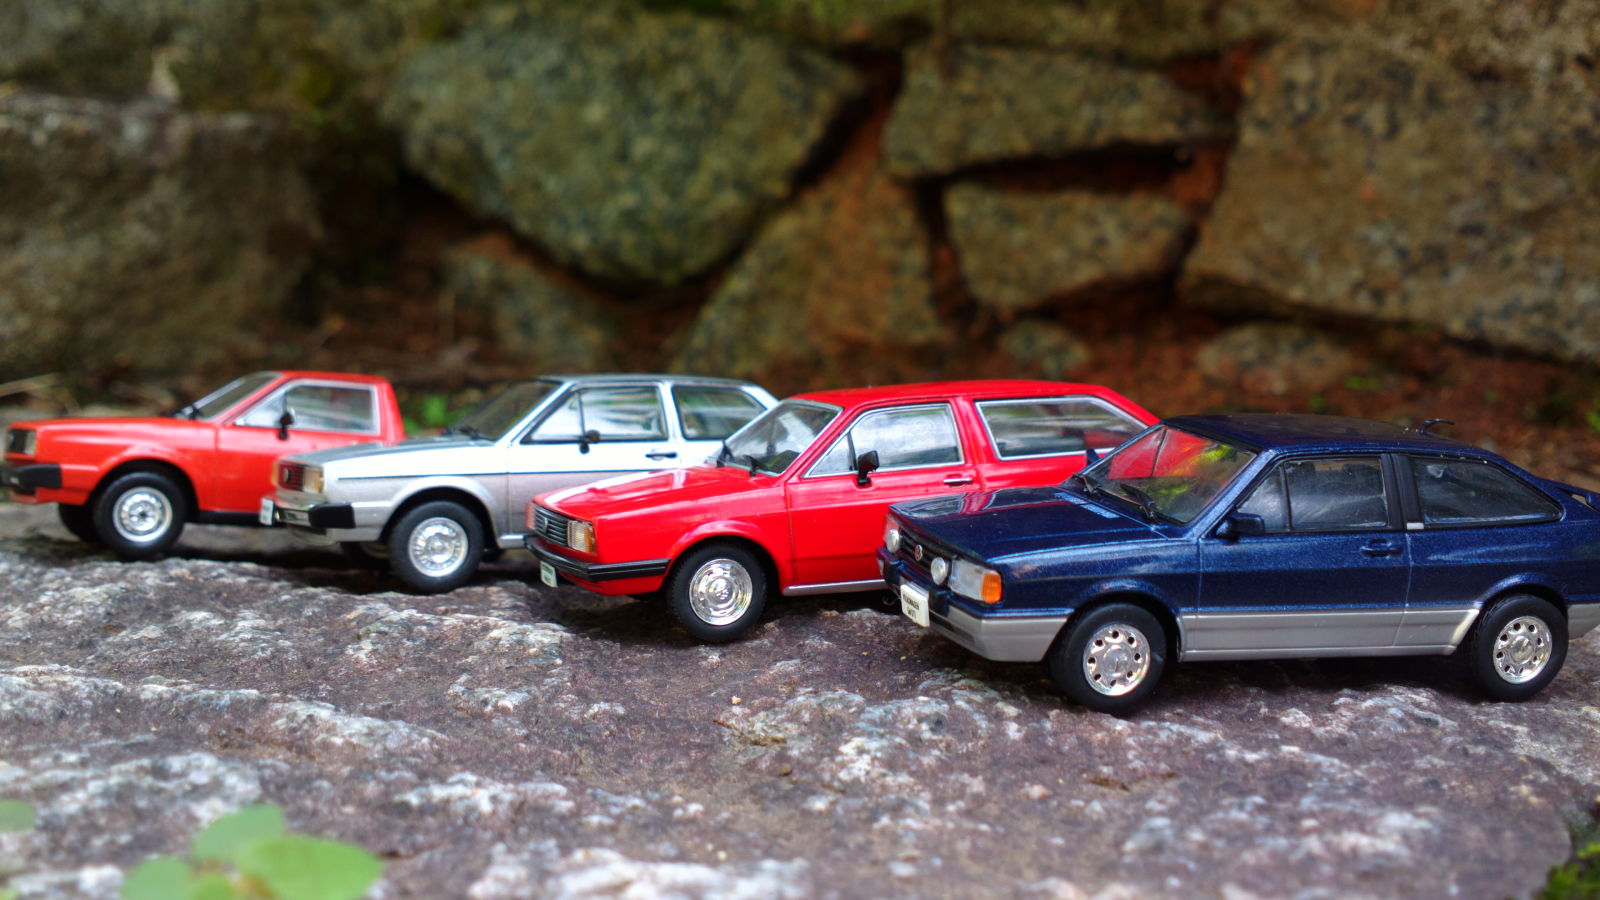 The squarey VW line. From left to right, VW Saveiro, VW Voyage, VW Parati (those two were exported to the US as the Fox and Fox Wagon) and VW Gol GTi 